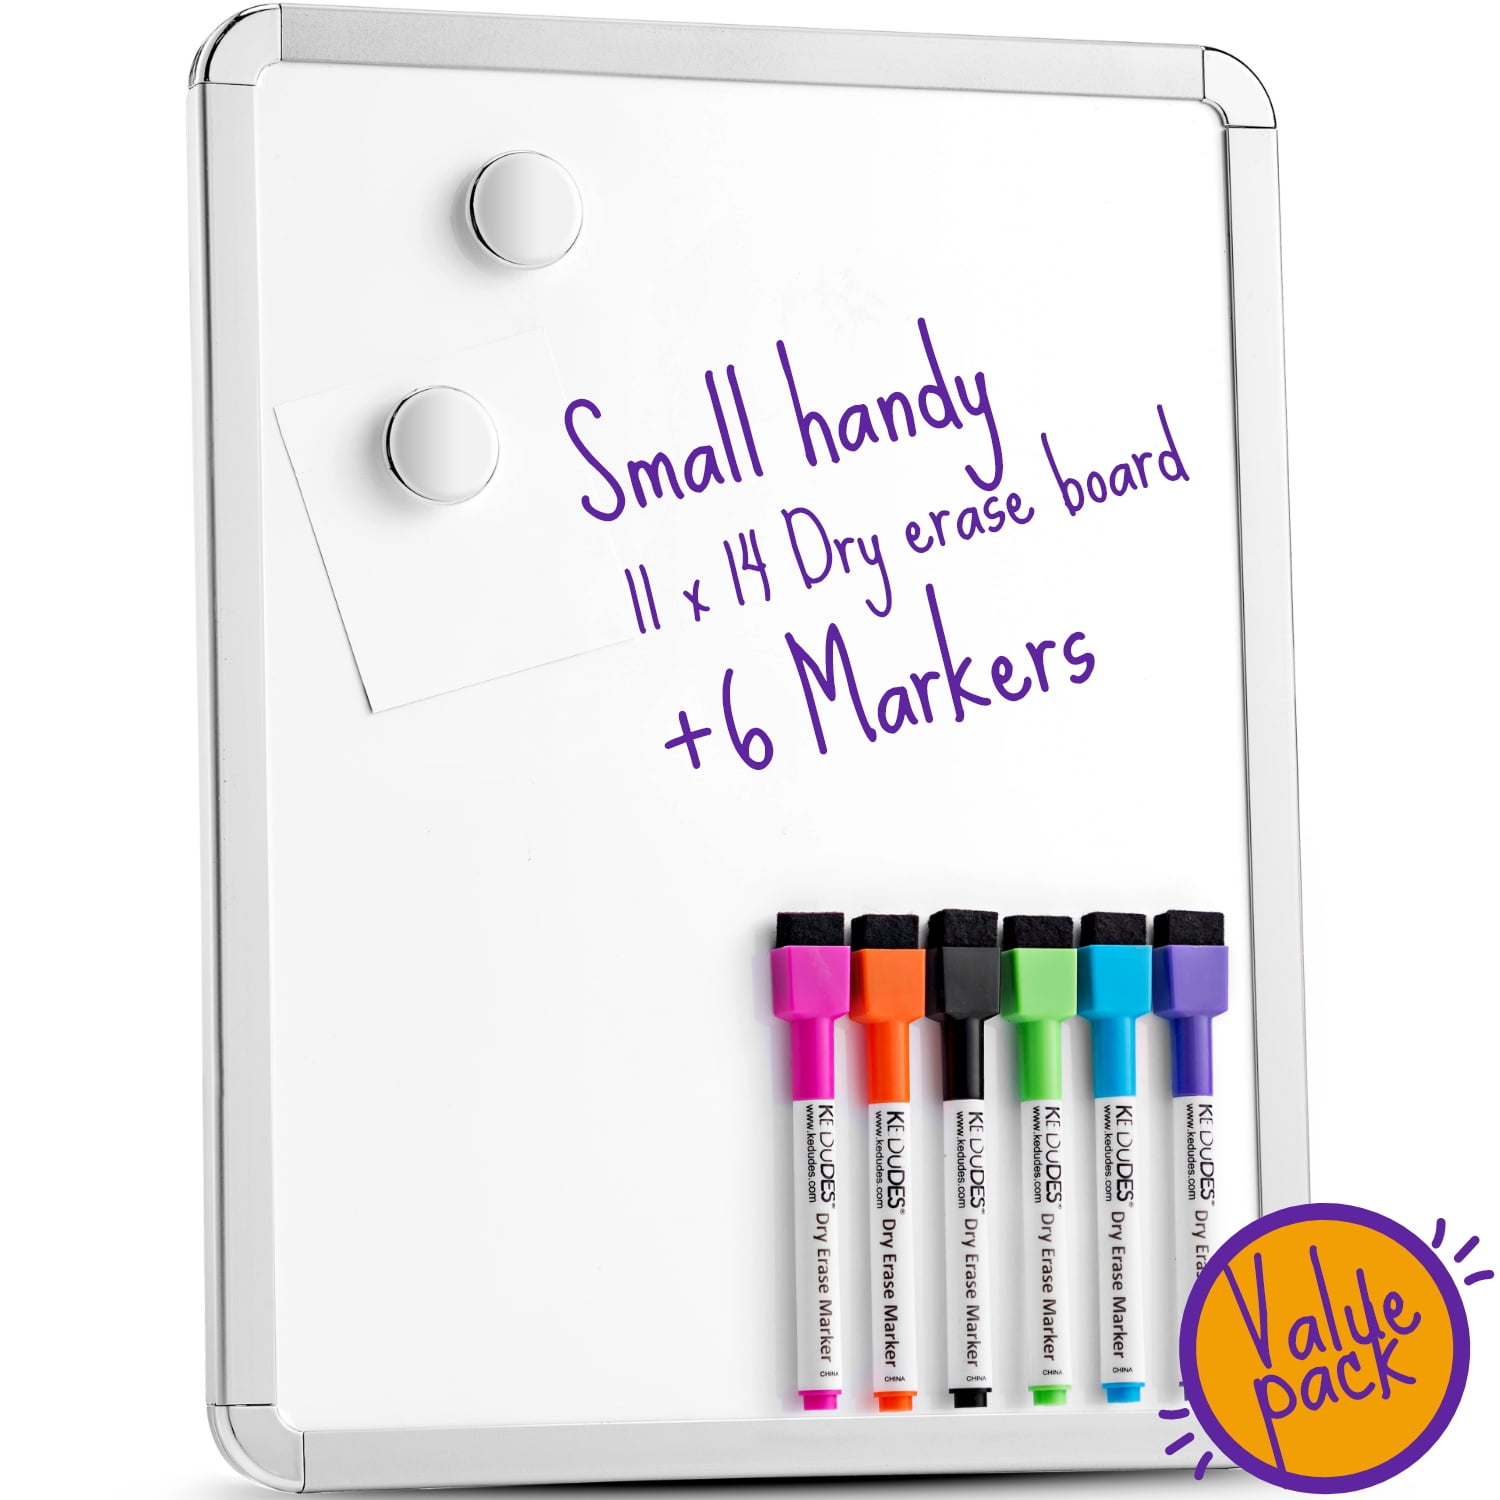 and More! Locker Magnetic 11’’ x 14’’ Dry Erase Whiteboard Great for Fridge Includes 6 Magnetic Dry Erase Markers Assorted Colors 